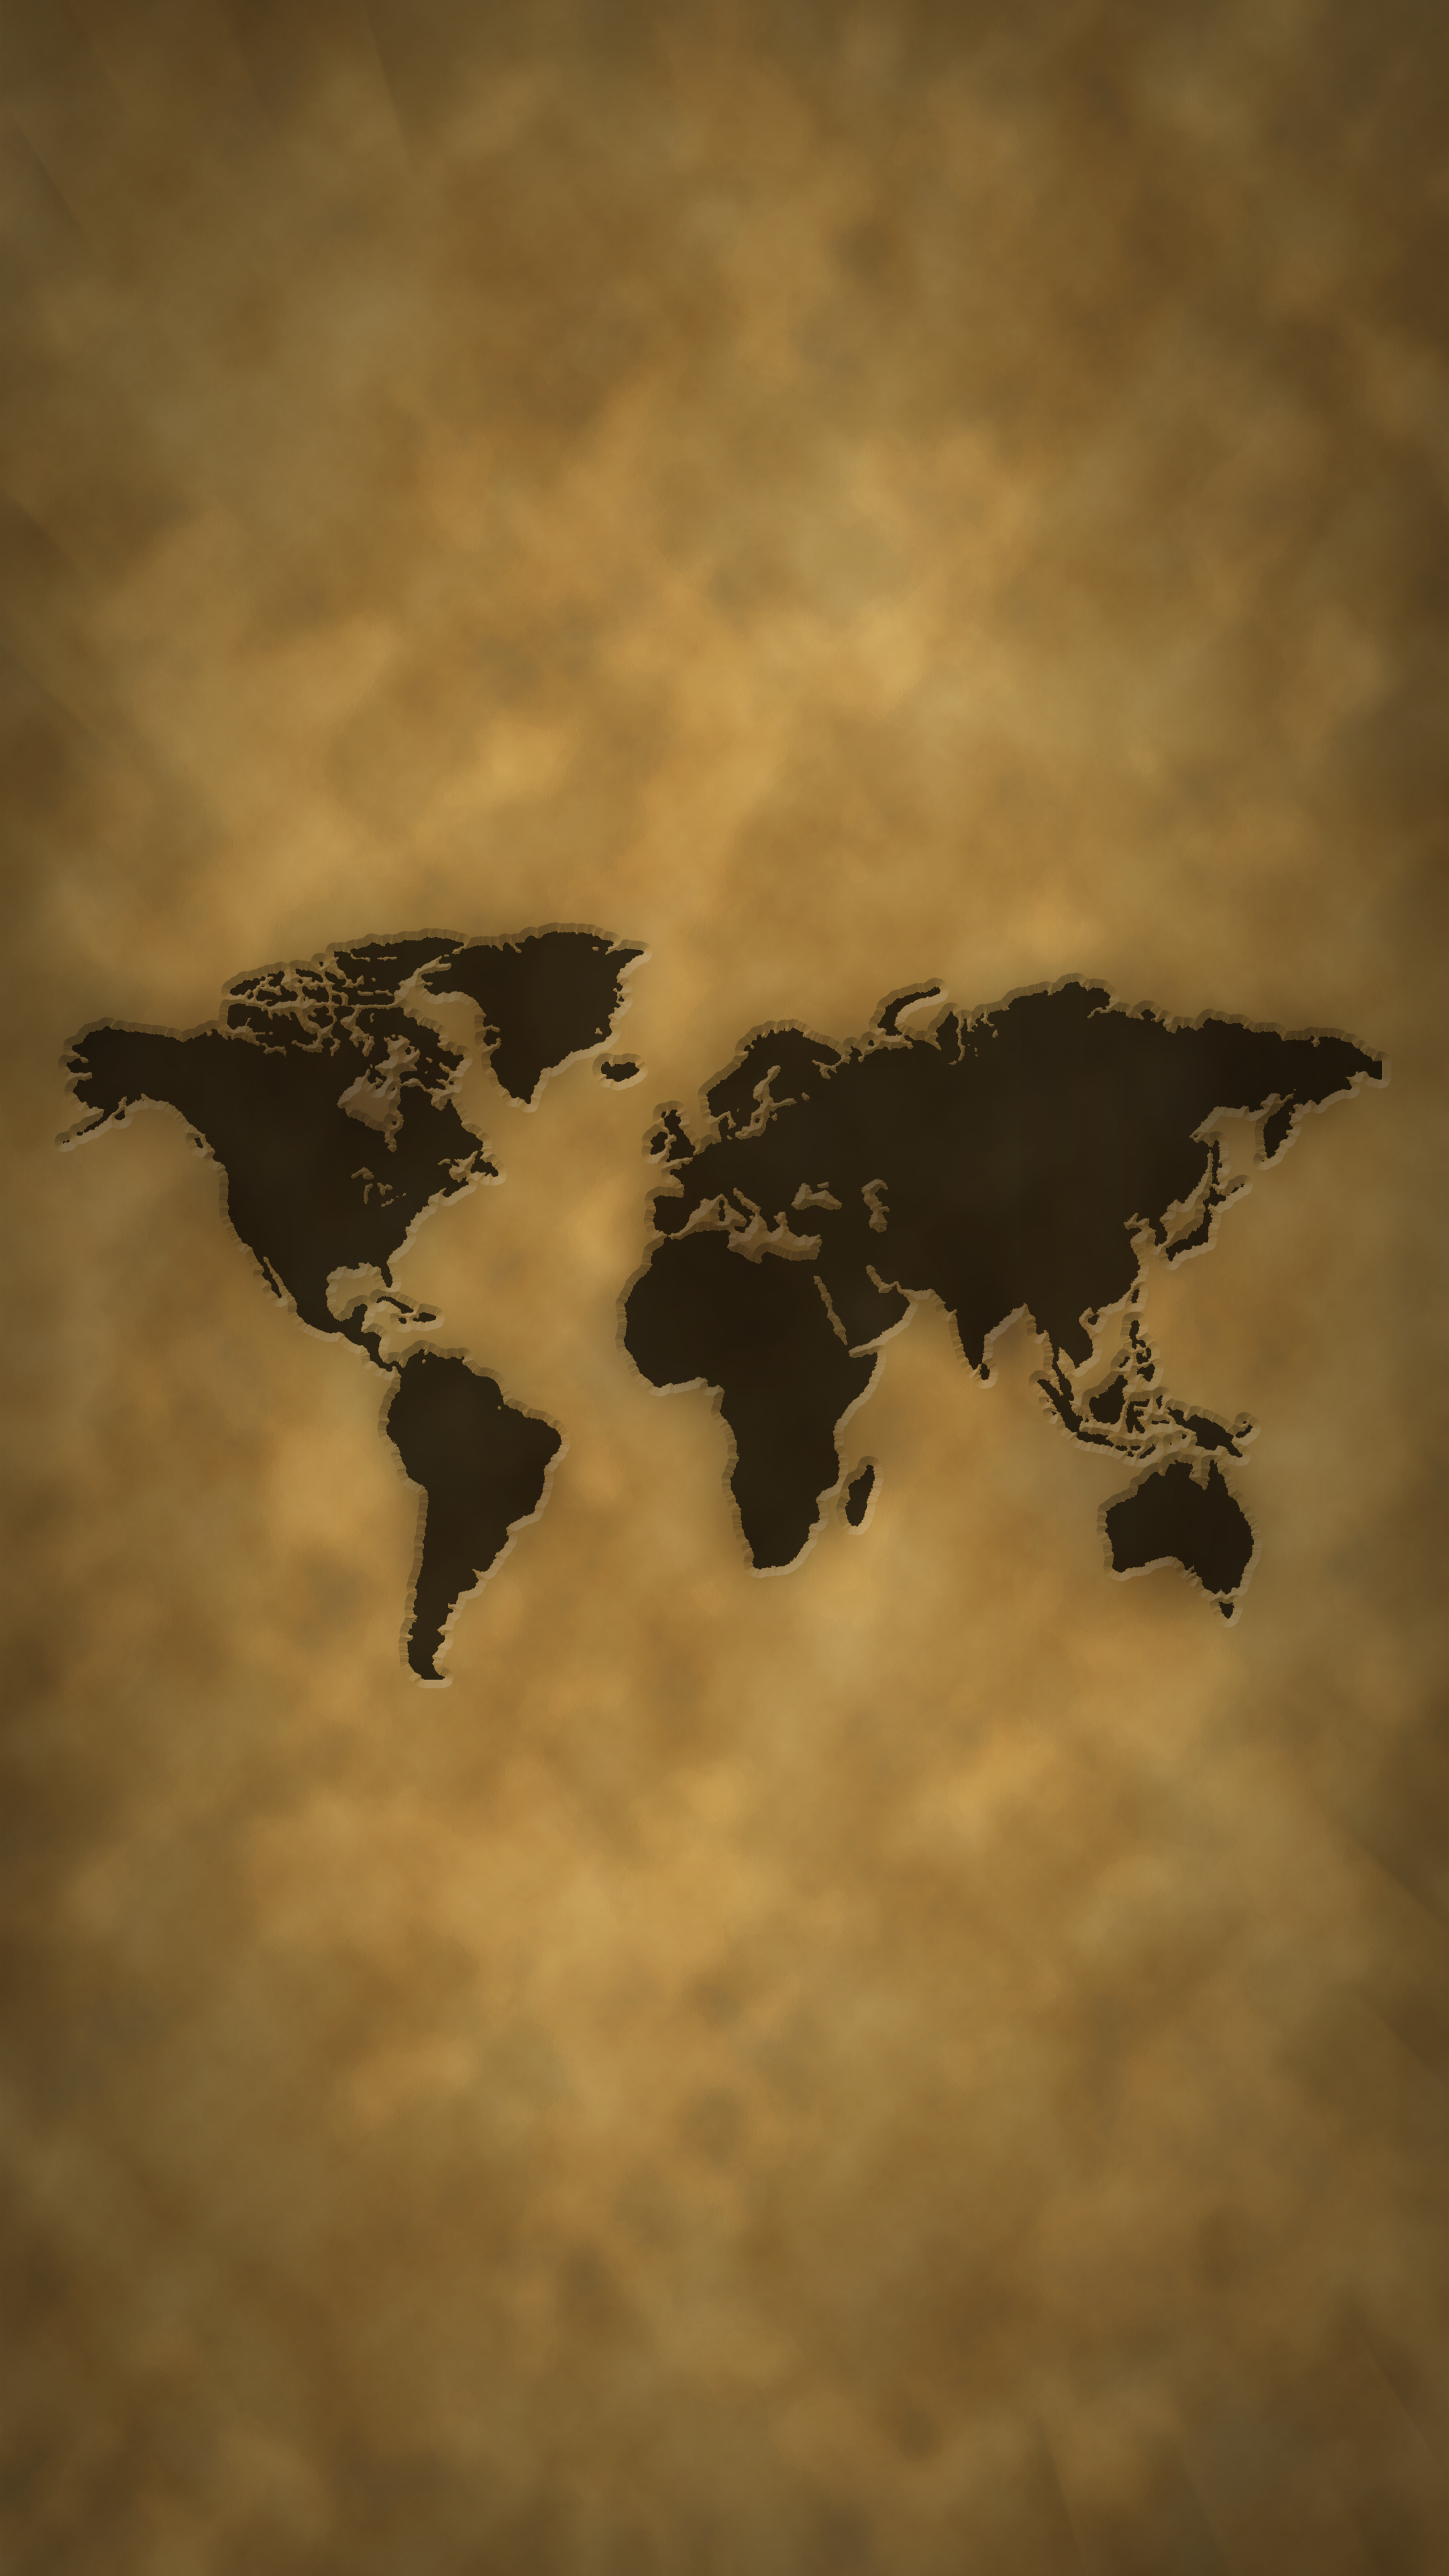 Misc world map, Various themes, Eclectic collection, Global perspectives, 2160x3840 4K Phone